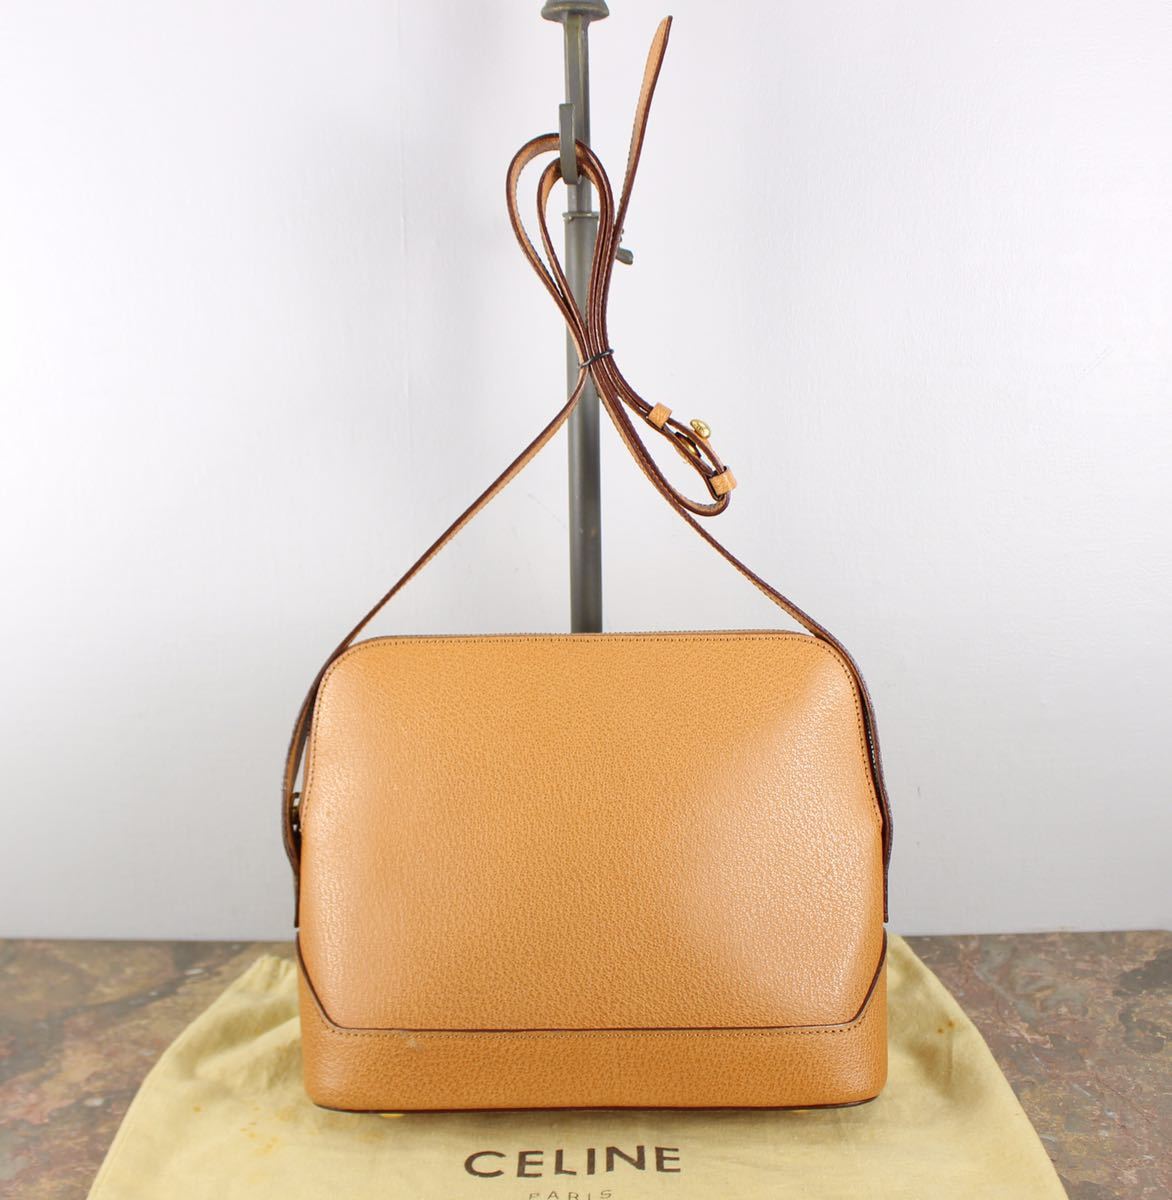 OLD CELINE LEATHER SHOULDER BAG MADE IN ITALY/オールドセリーヌレザーショルダーバッグ